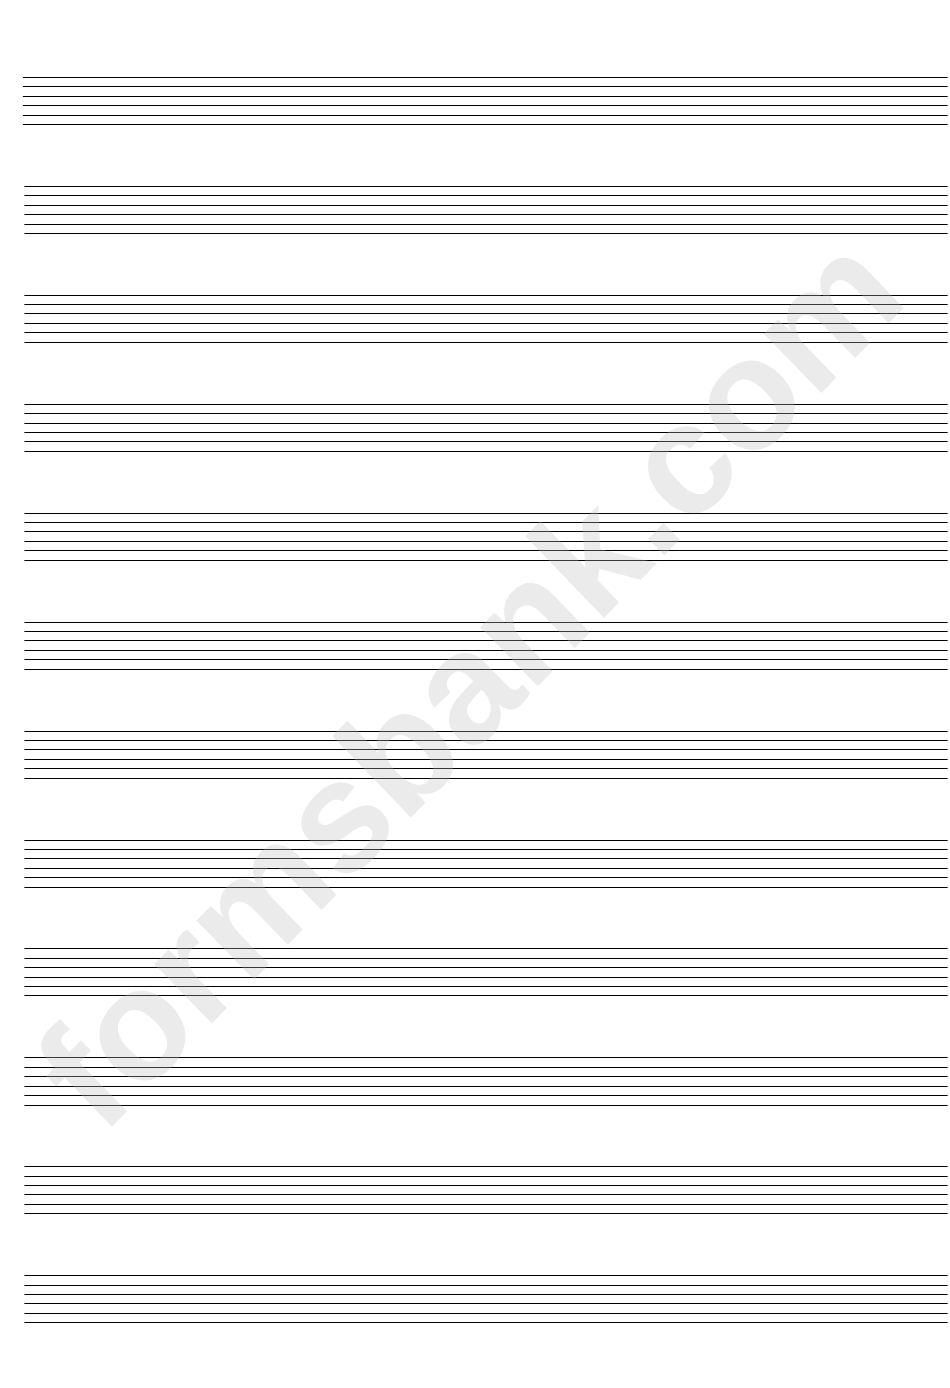 12-Stave 6 Line Lute Tablature Blank Staff Paper